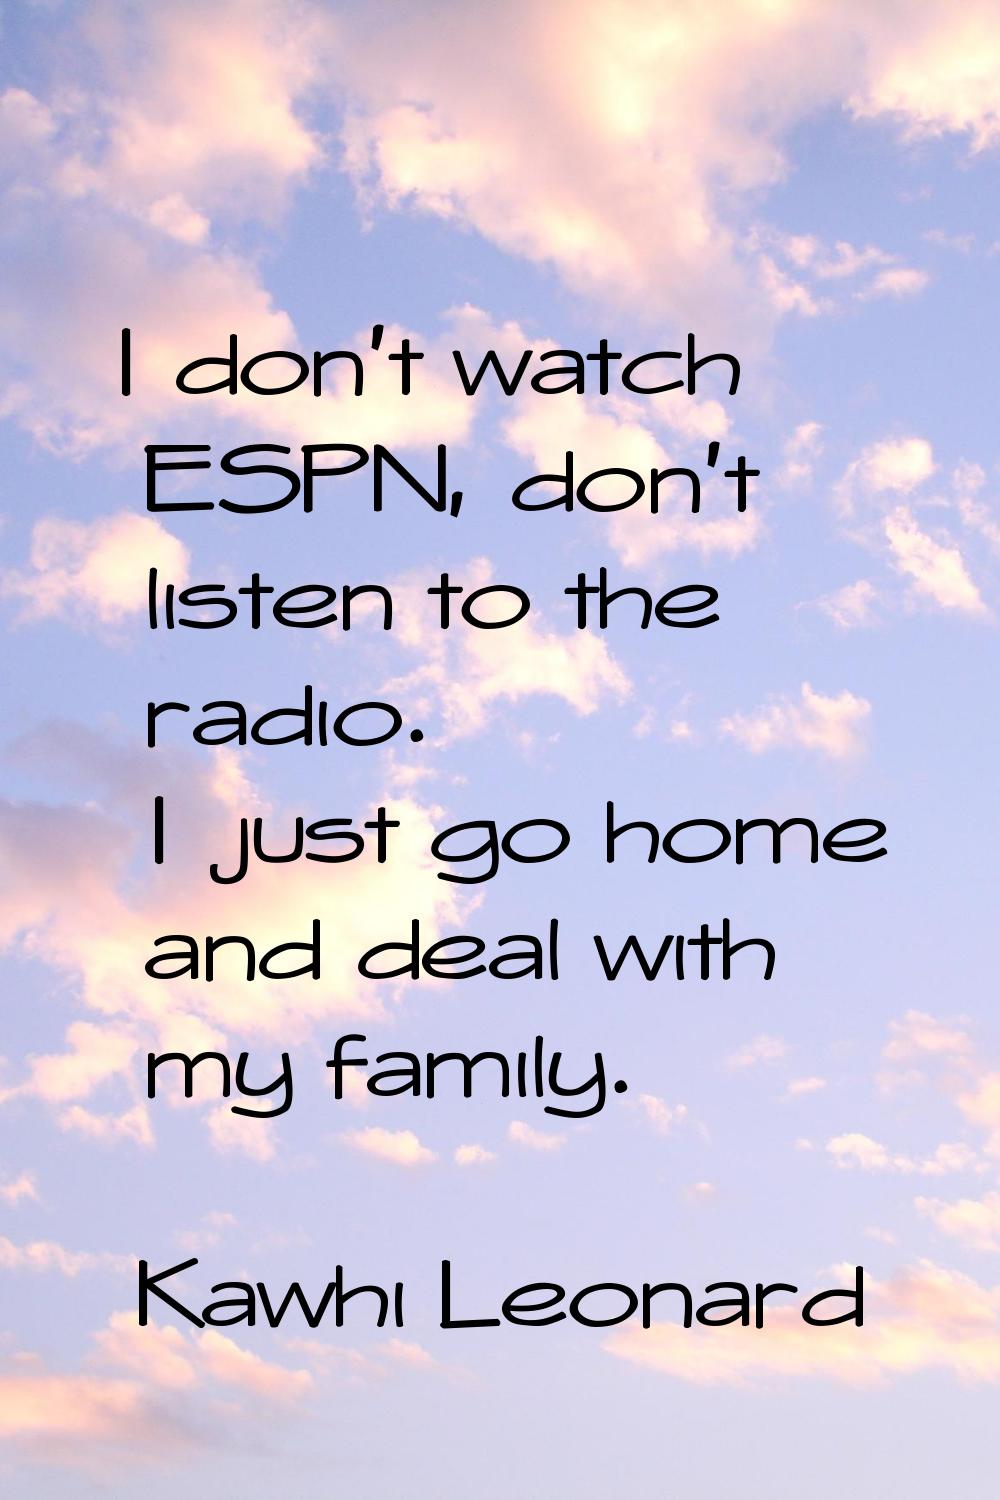 I don't watch ESPN, don't listen to the radio. I just go home and deal with my family.